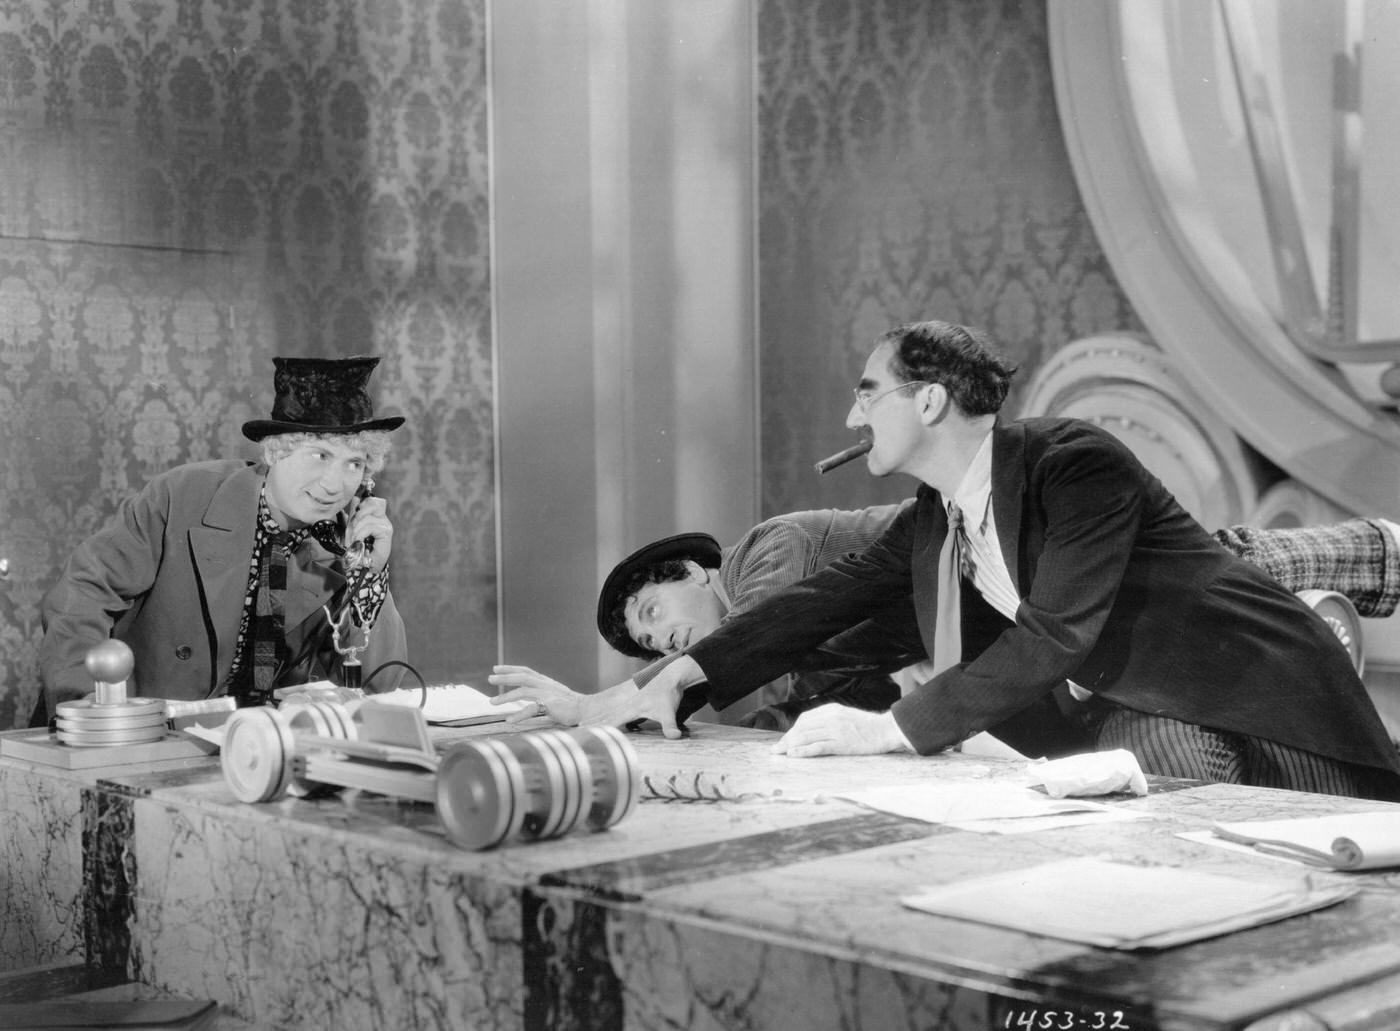 Harpo, Chico, and Groucho Marx star in Duck Soup (1933).